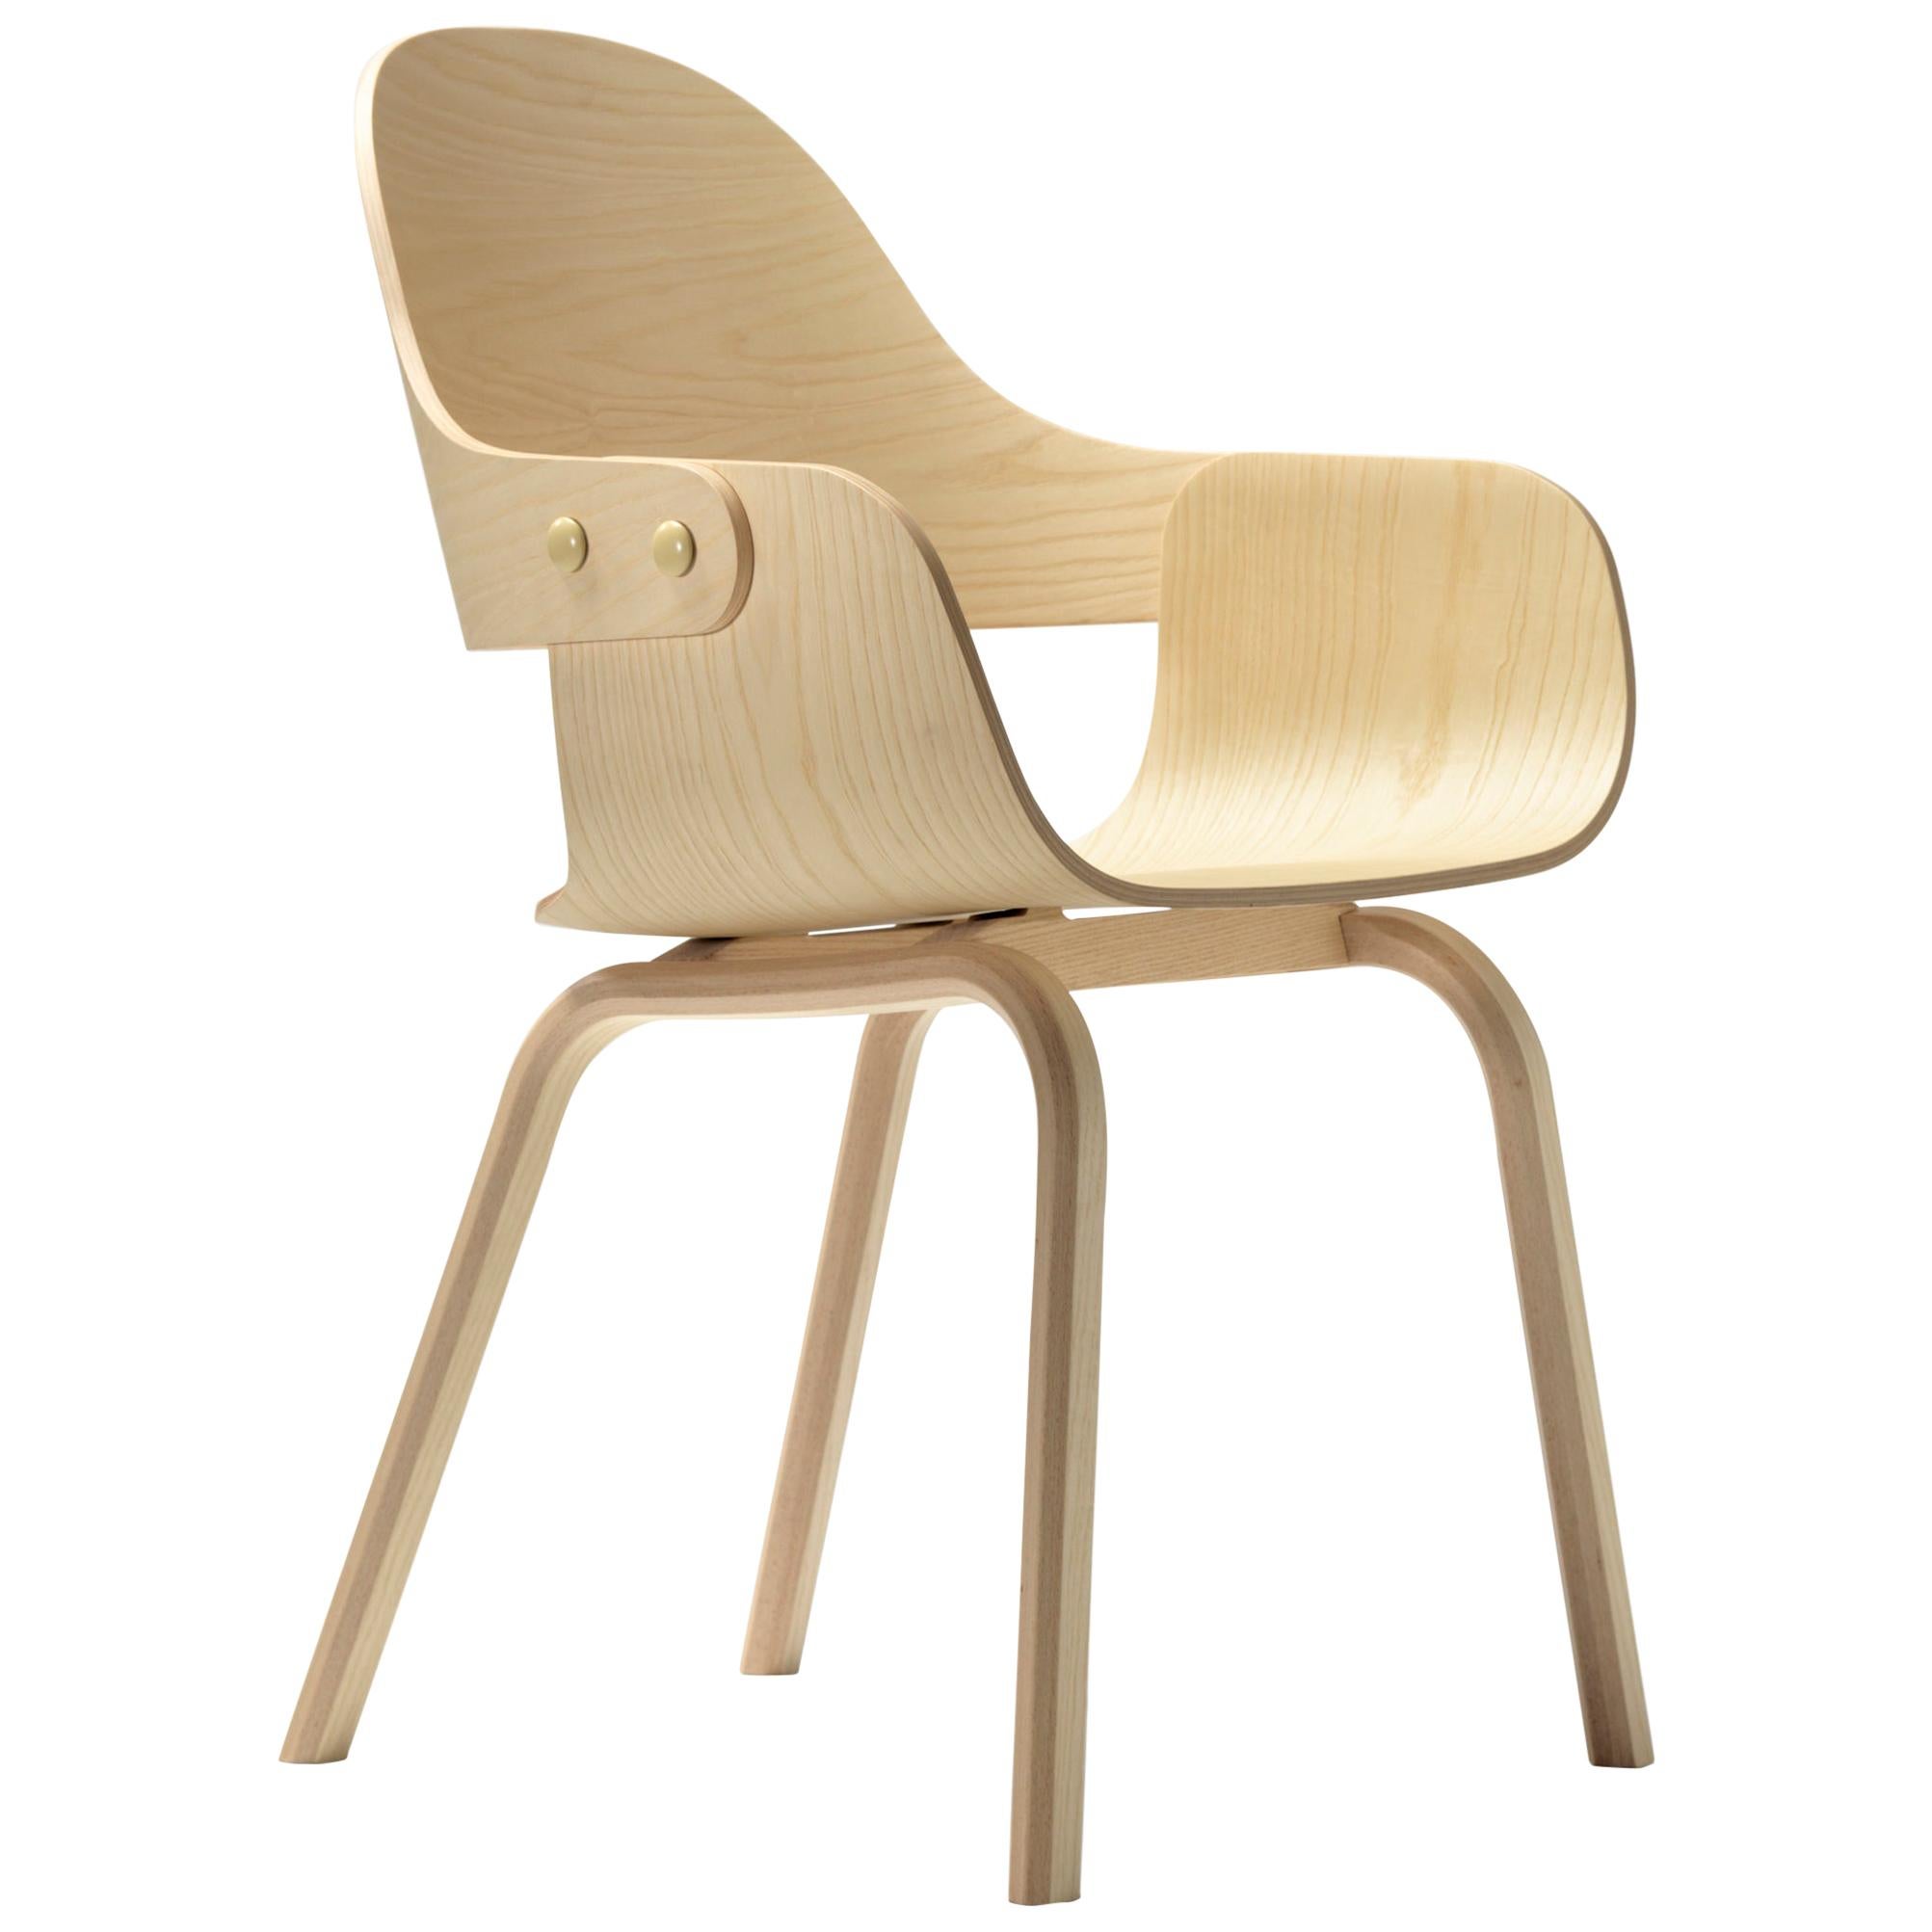 Showtime nude chair by Jaime Hayon erganomic office or dinining chair ashwood 